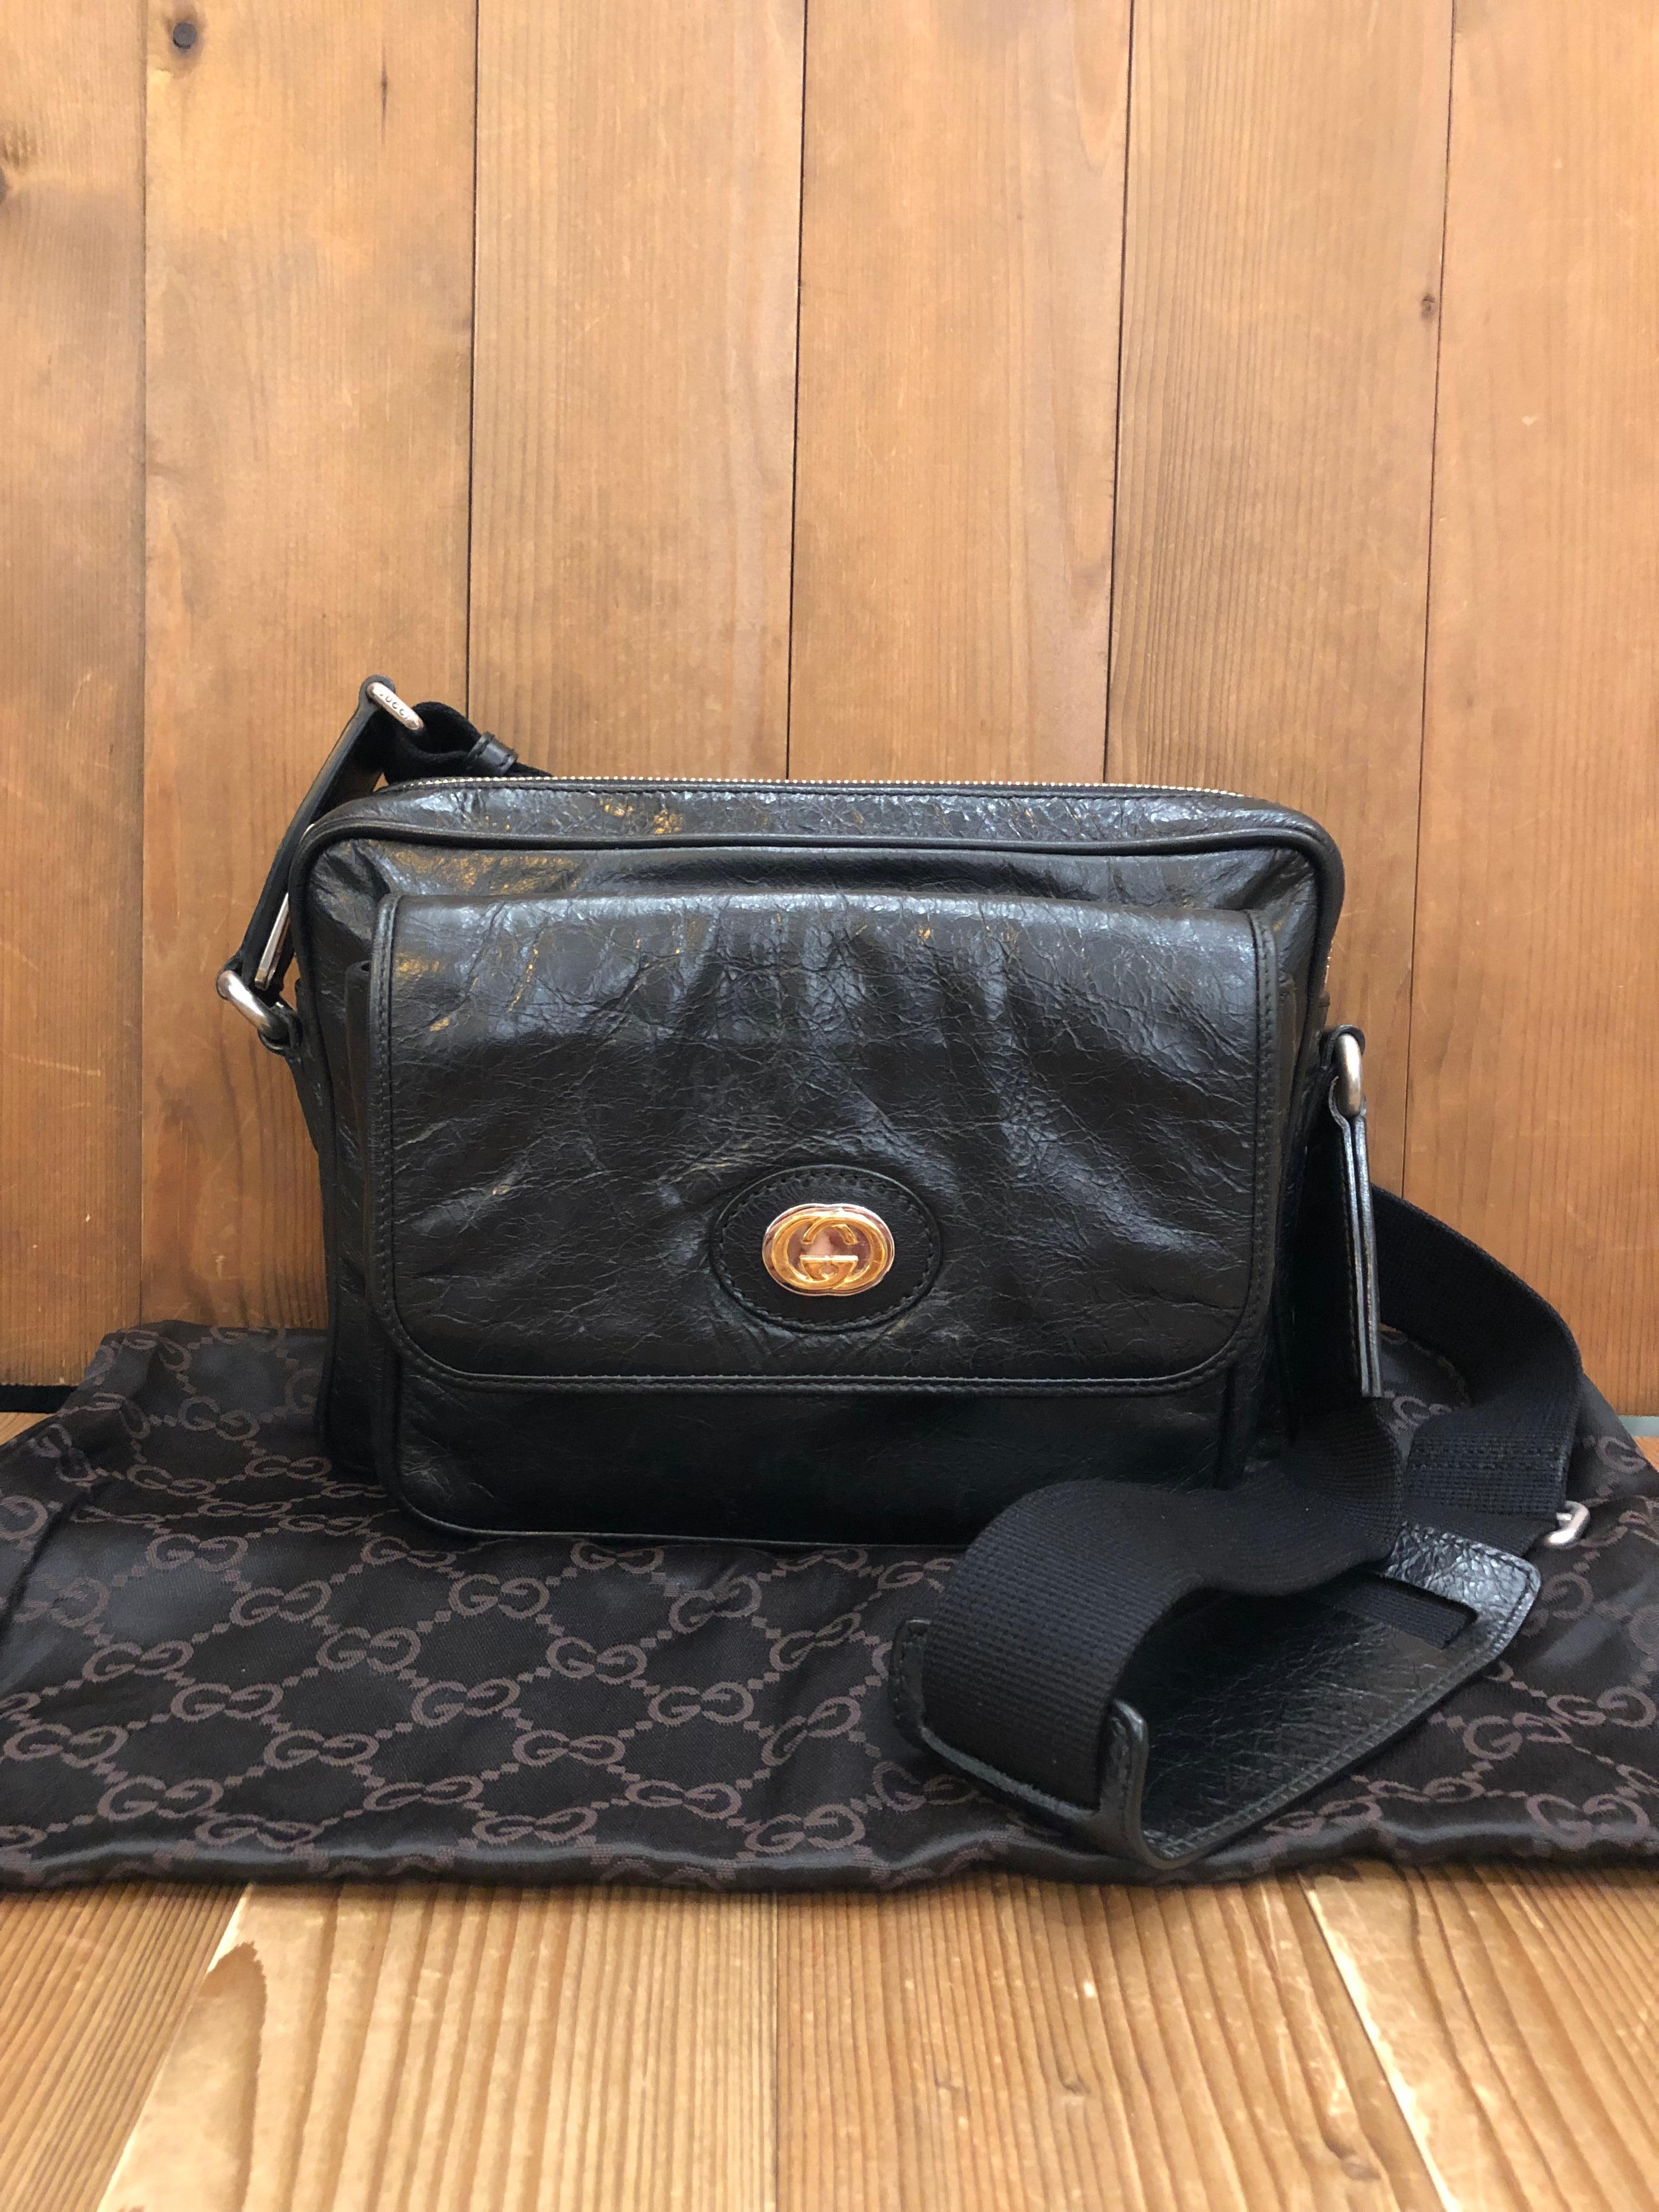 This GUCCI camera bag is crafted of distressed calfskin leather in black featuring silver hardware and gold/silver-toned GG Morpheus logo. Top zipper closure opens to the main compartment lined with black canvas featuring a zippered pocket. Front